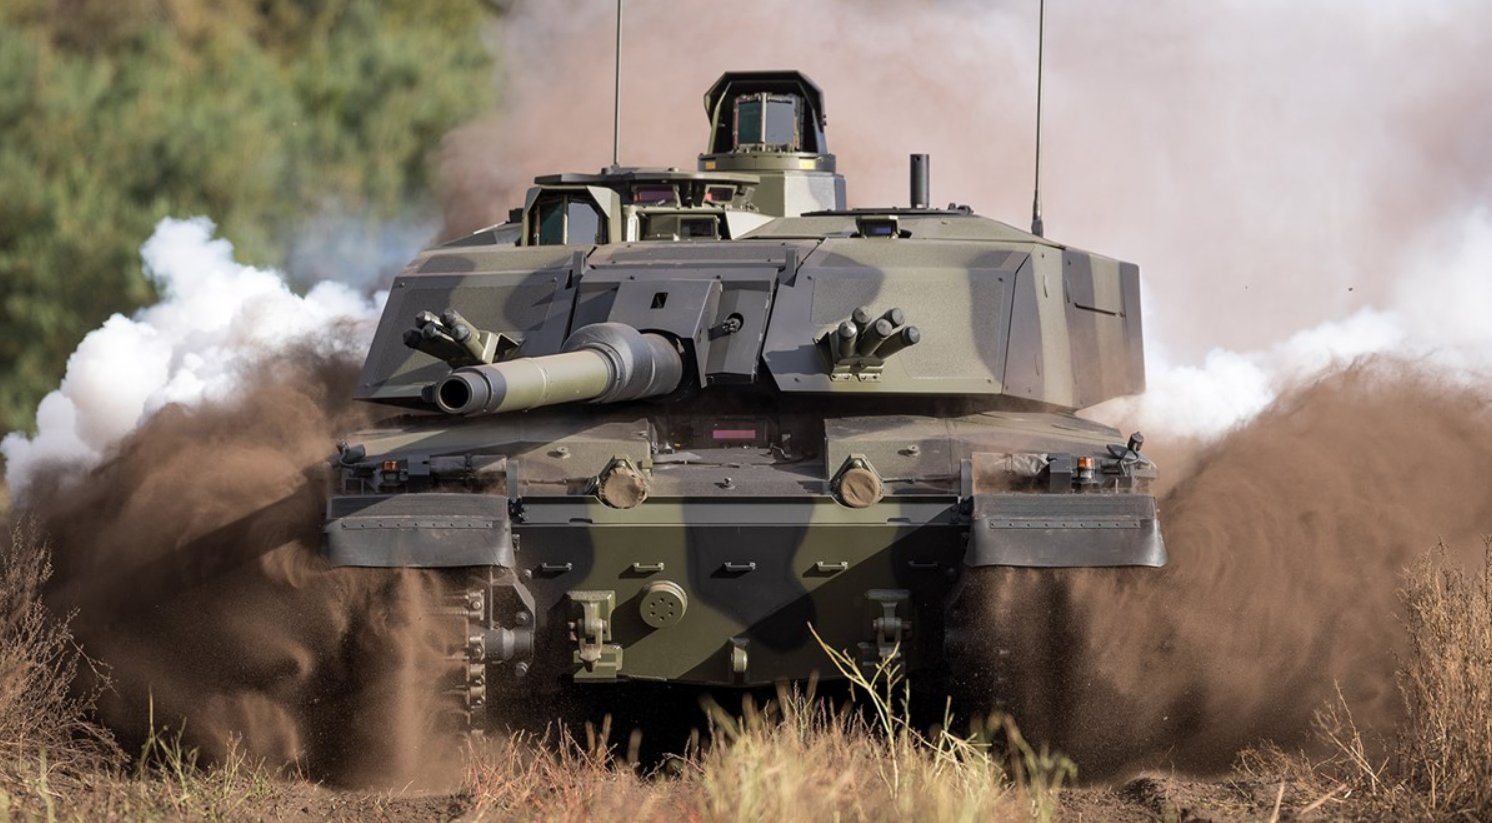 The British Army's Challenger 3 Main Battle Tank is seen moving across a dusty grassland. The tank is painted in black and green camouflage, and its tracked wheels are shrouded in brown dust from the ground. In the back, white smoke is seen, presumably from the tank's exhaust.